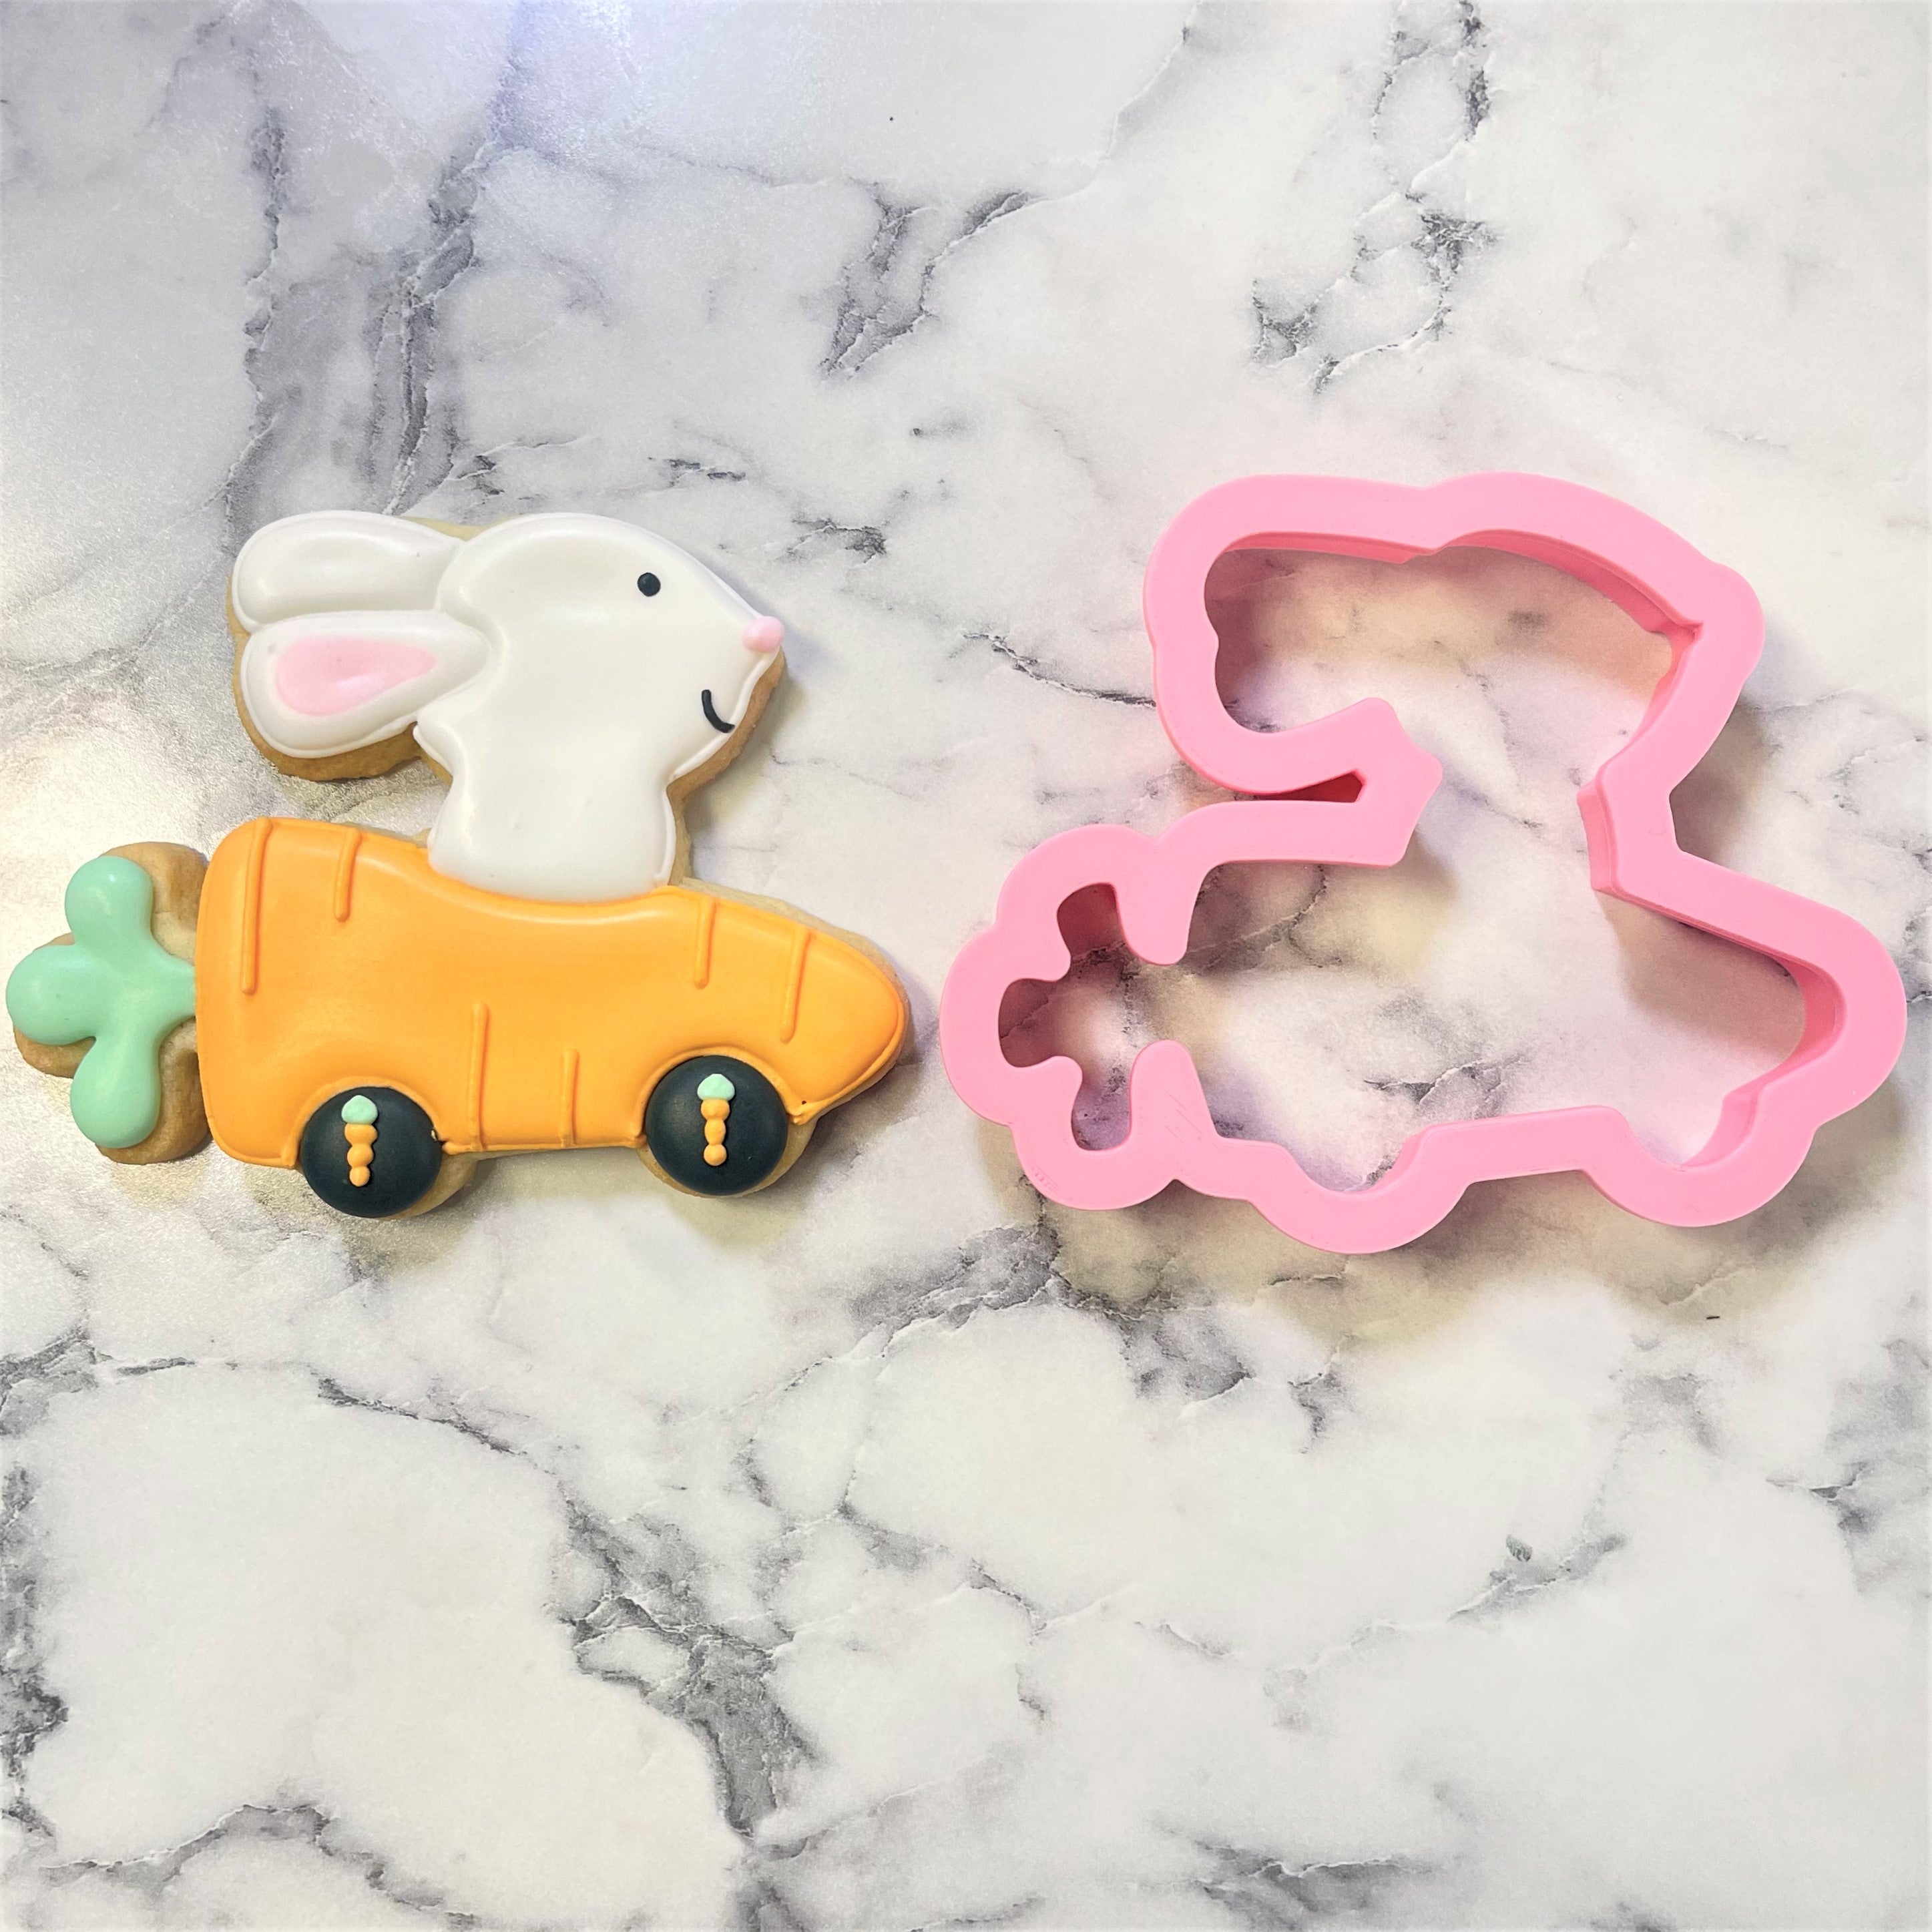 FUSOTO Easter Cookie Cutters, 6 Pcs Holiday Cookie Cutters Easter Shapes -  Bunny, Egg, Crosses, Flower Basket, Carrot for Cookie Baking